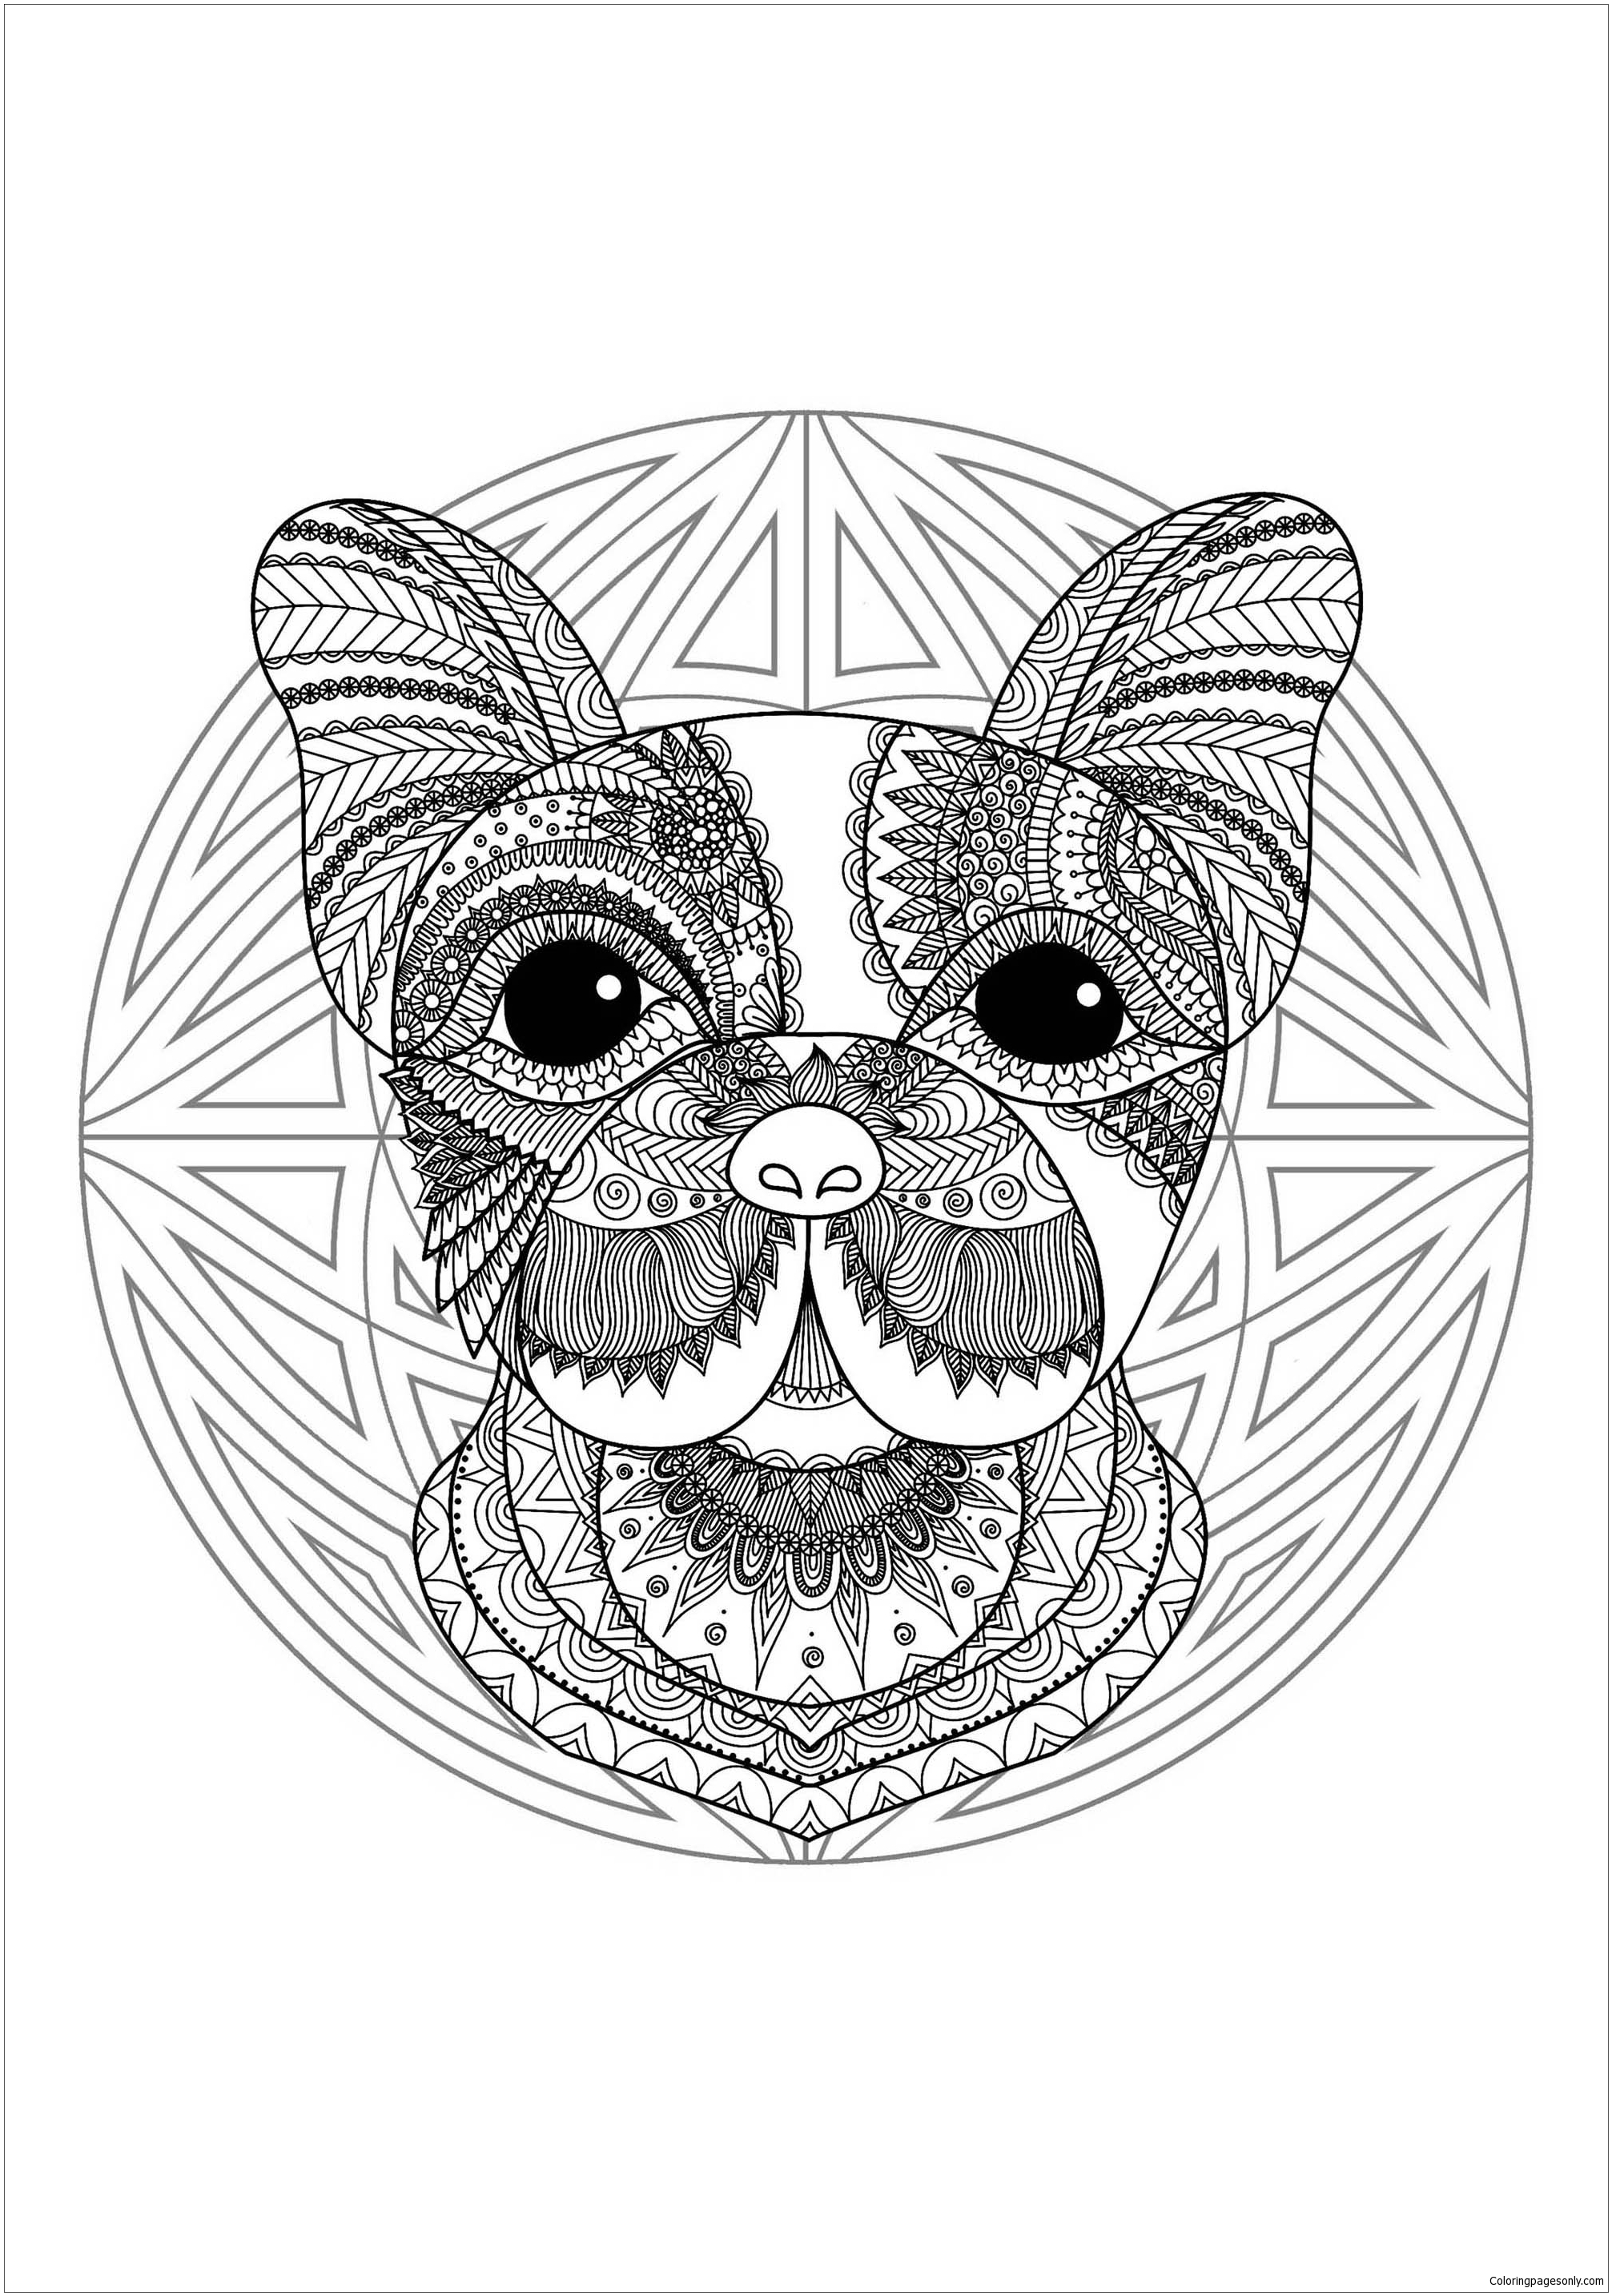 Mandala with cute Dog head and geometric patterns Coloring Pages